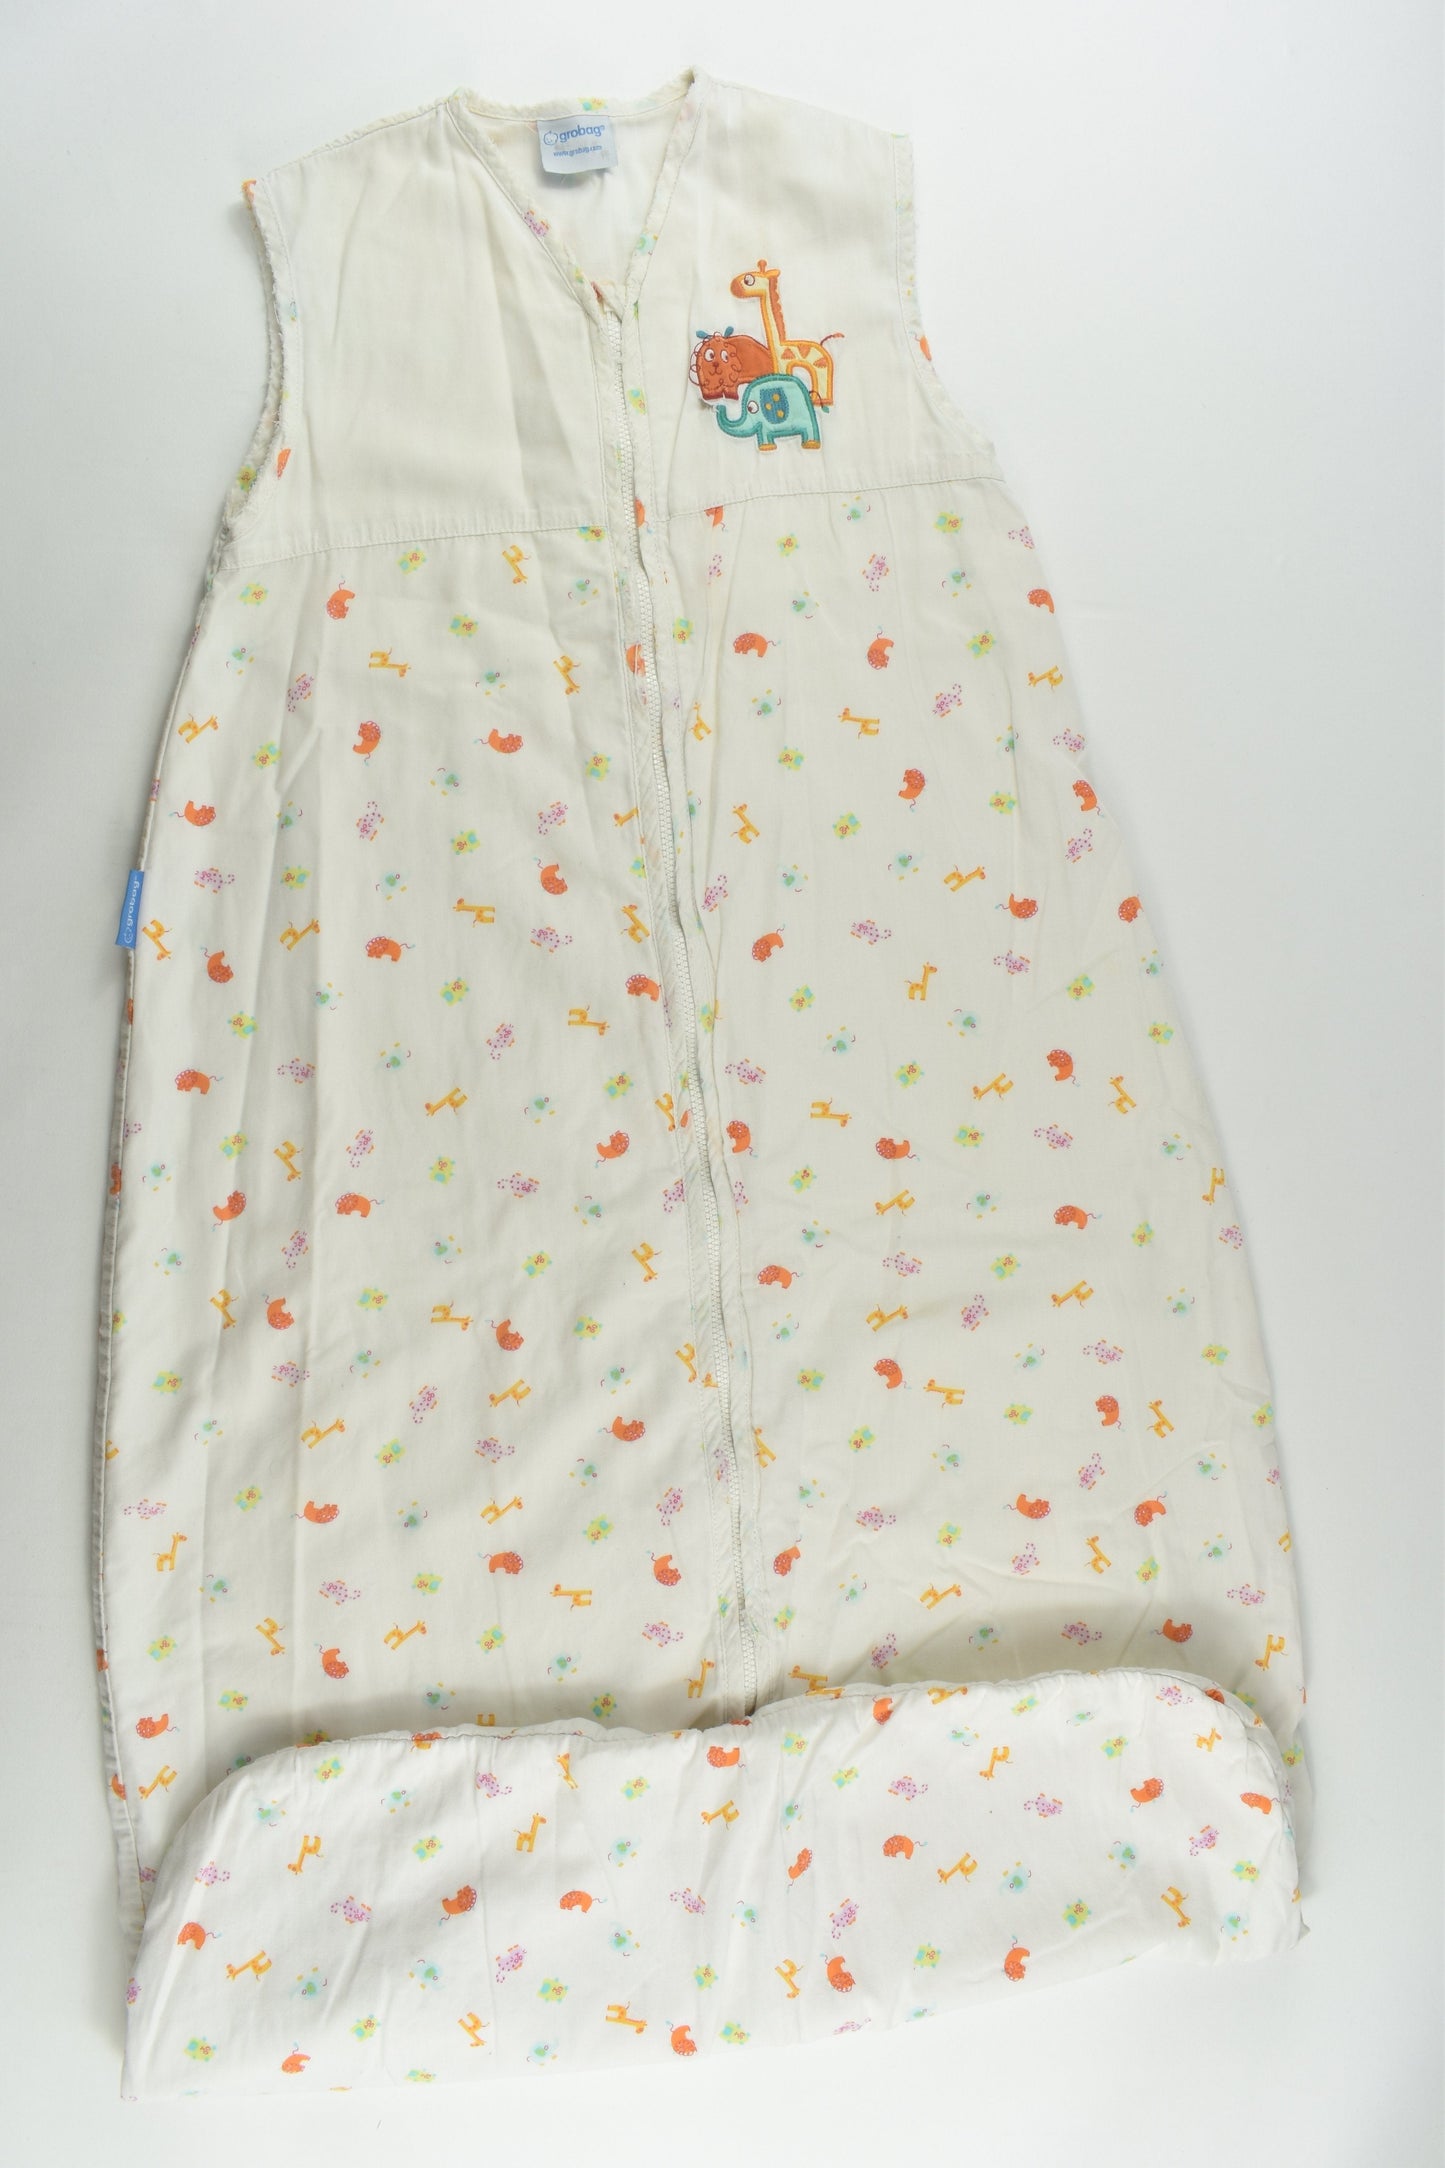 Grobag Size 1-3 (18-36 months) Approx 1.0 Tog Colourful Animals Sleeping Bag